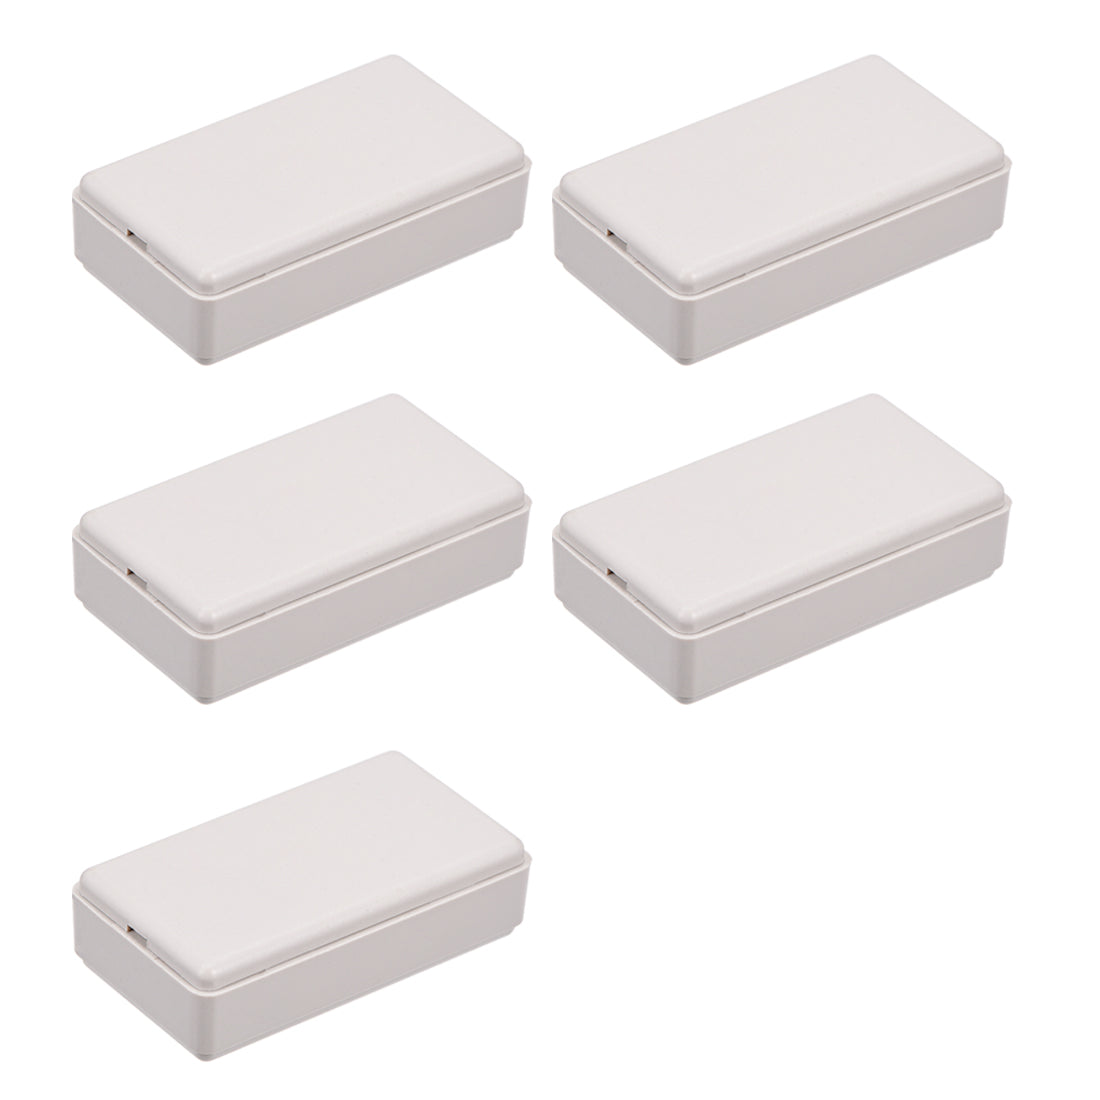 uxcell Uxcell 5Pcs 48 x 27 x 14mm Electronic Plastic DIY Junction Box Enclosure Case Gray